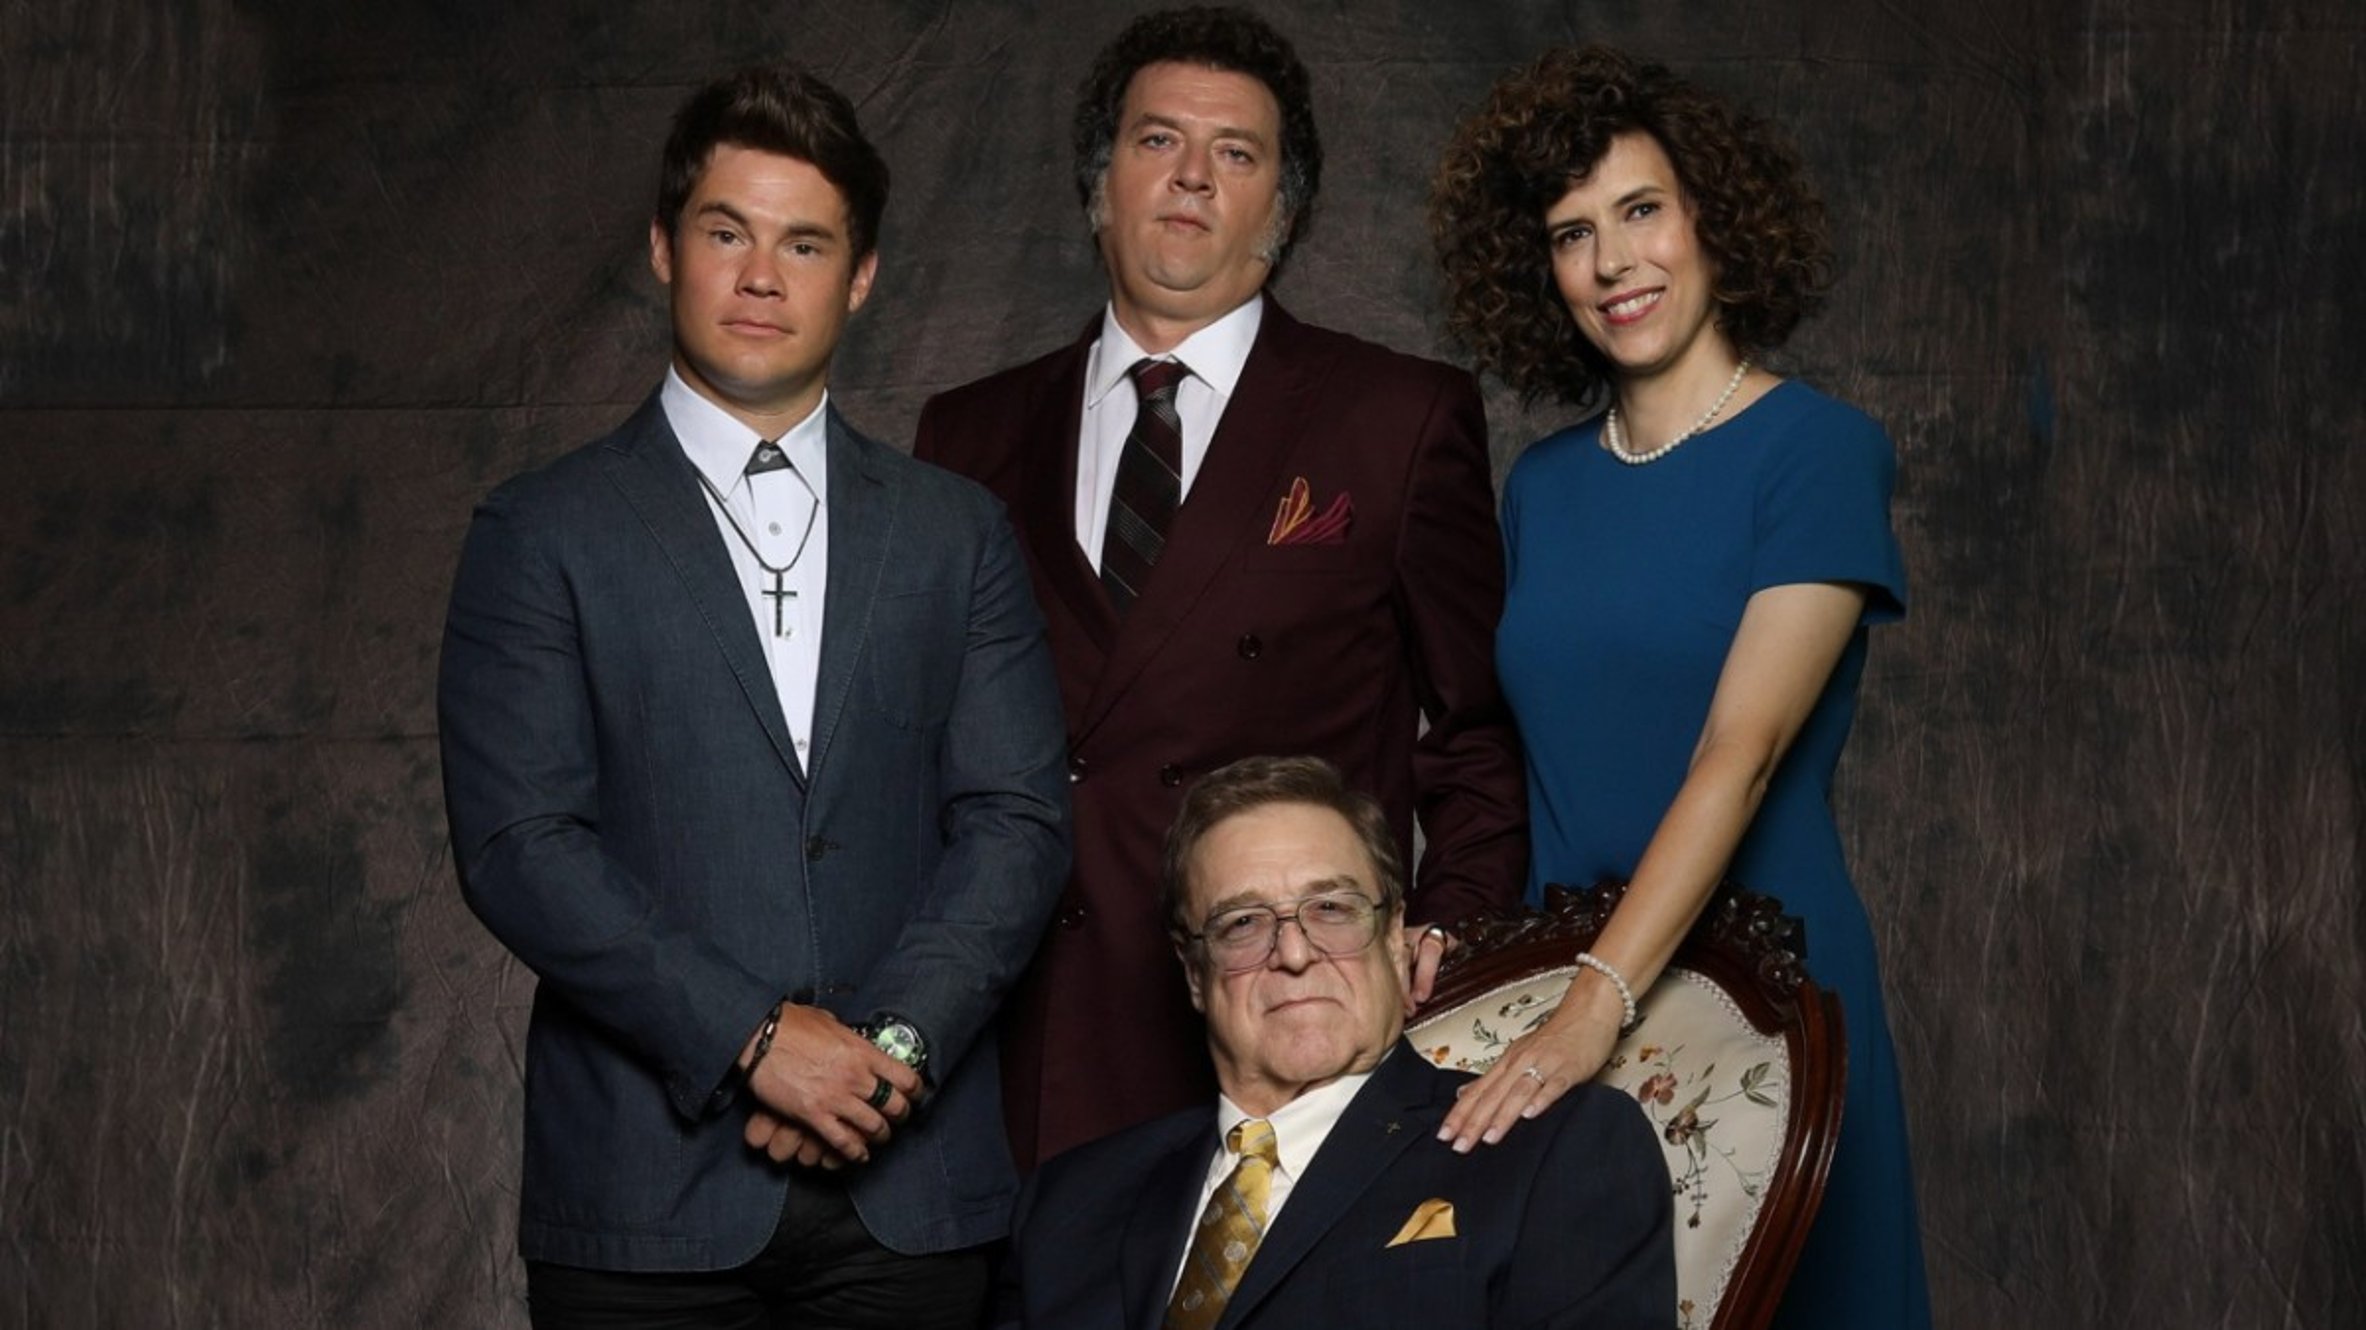 HBO’s The Righteous Gemstones - Now Casting